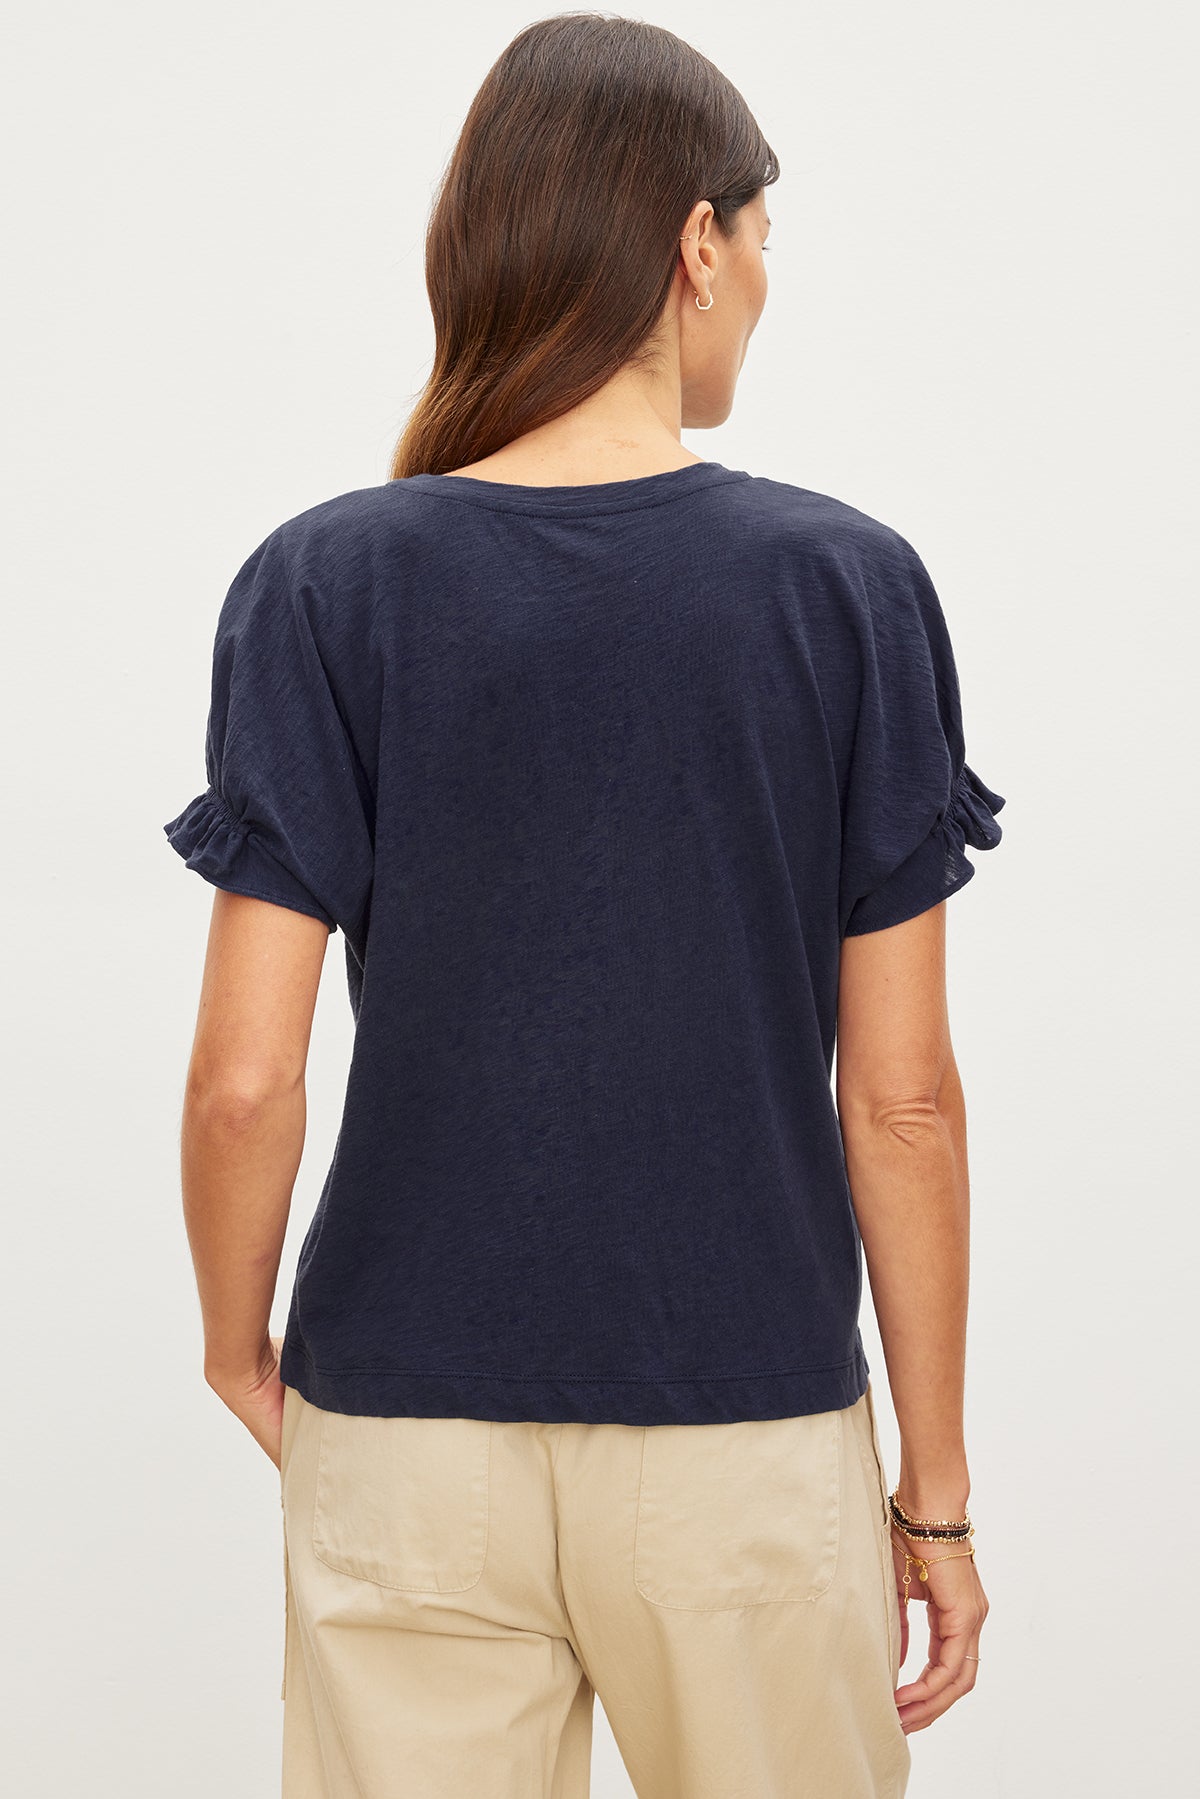   The back view of a woman wearing a MIMI CREW NECK TEE, a wardrobe essential with its cotton slub fabric and crew neckline, by Velvet by Graham & Spencer. 